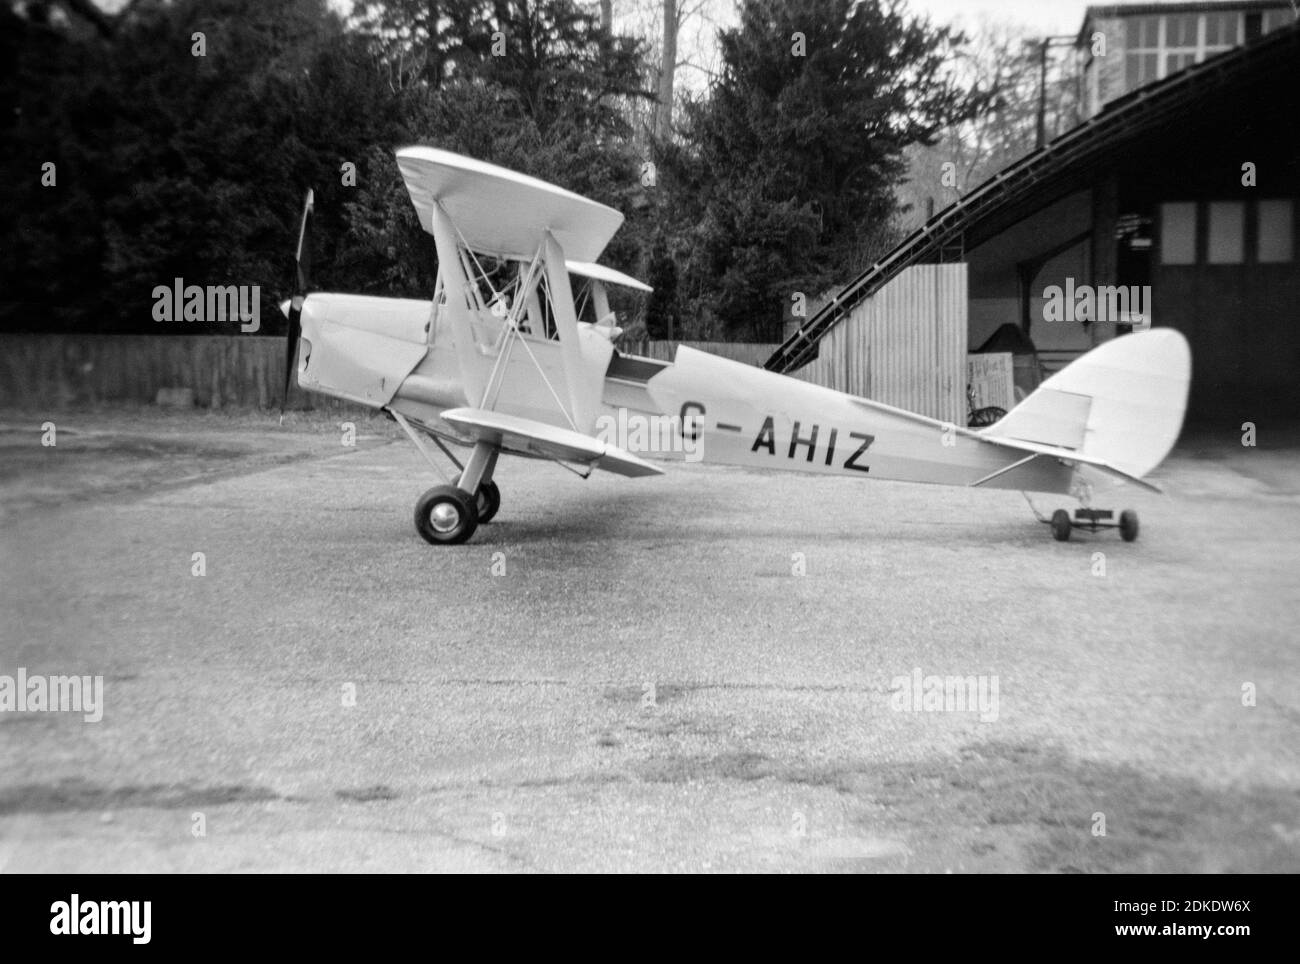 A vintage black and white photograph taken in 1954 showing a De Havilland Tiger Moth aeroplane, registration G-AHIZ, parked outside of a hangar in England. Stock Photo